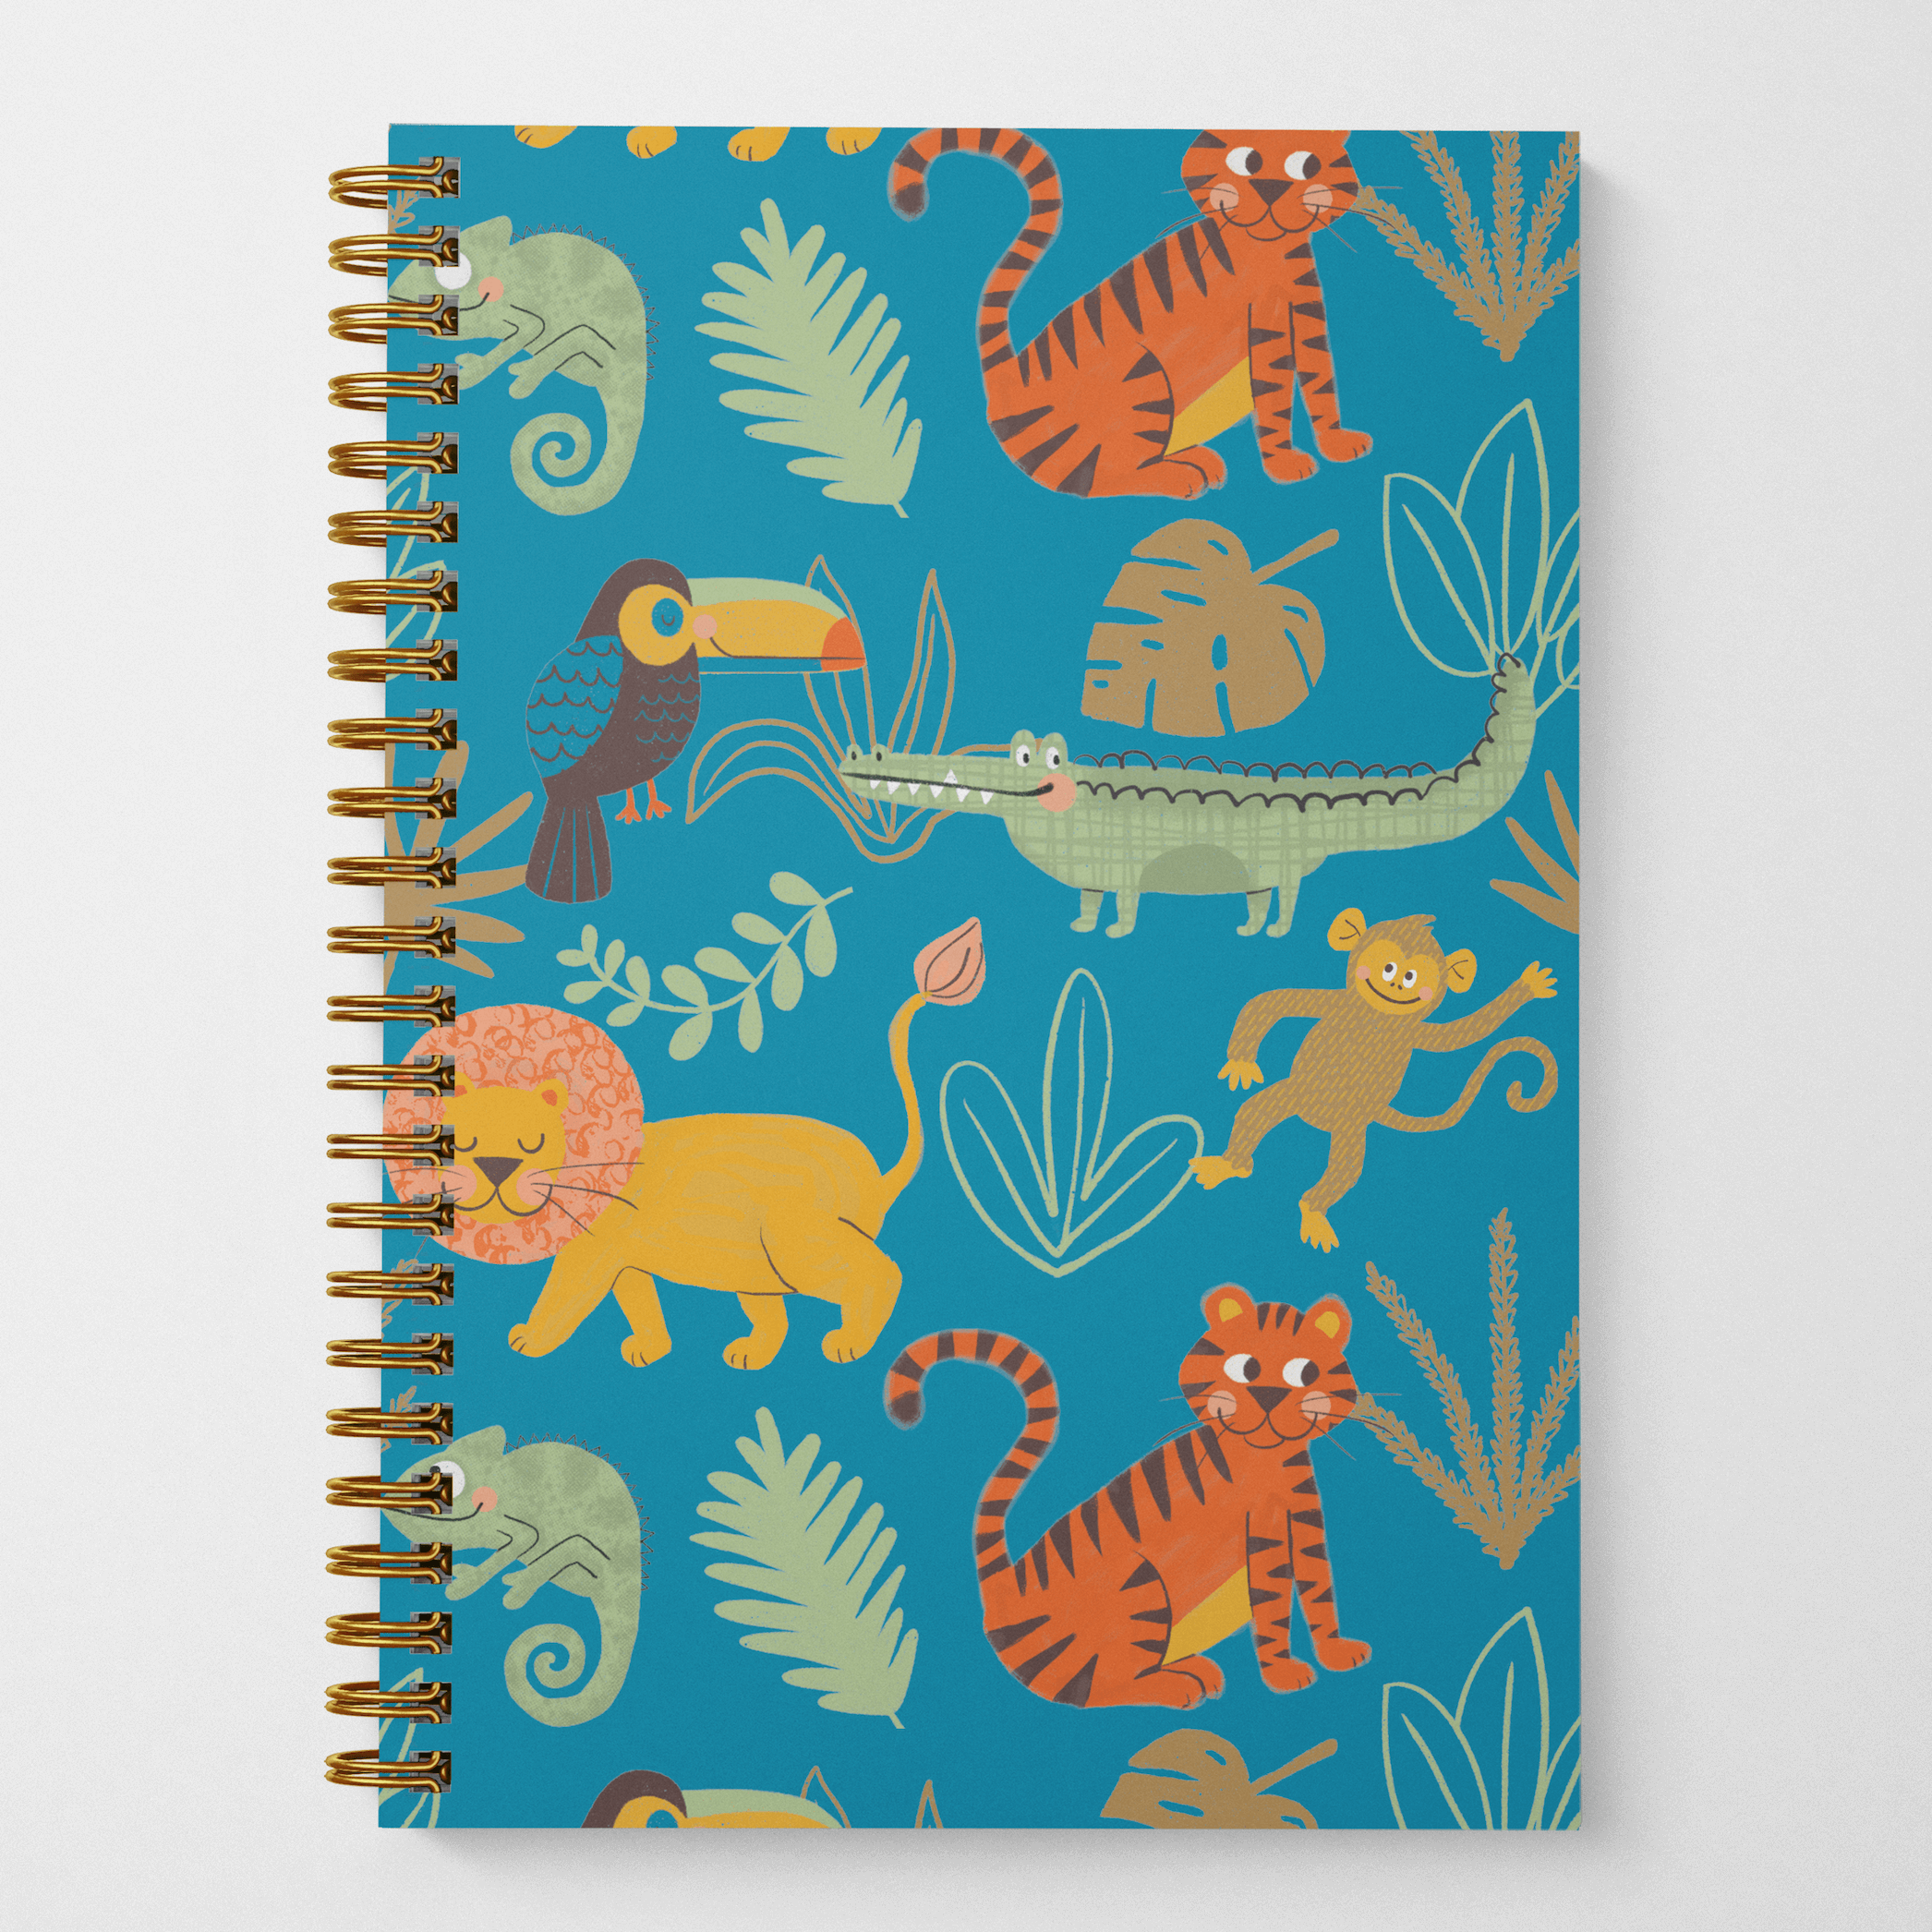 A photo of an 8.5" x 5.5" wire spiral-bound notebook featuring hand-illustrated cute jungle animals such as lions, tigers, toucans, iguanas, monkeys, and crocodiles on a bright blue background with green and brown leaves in a tossed pattern on the cover.